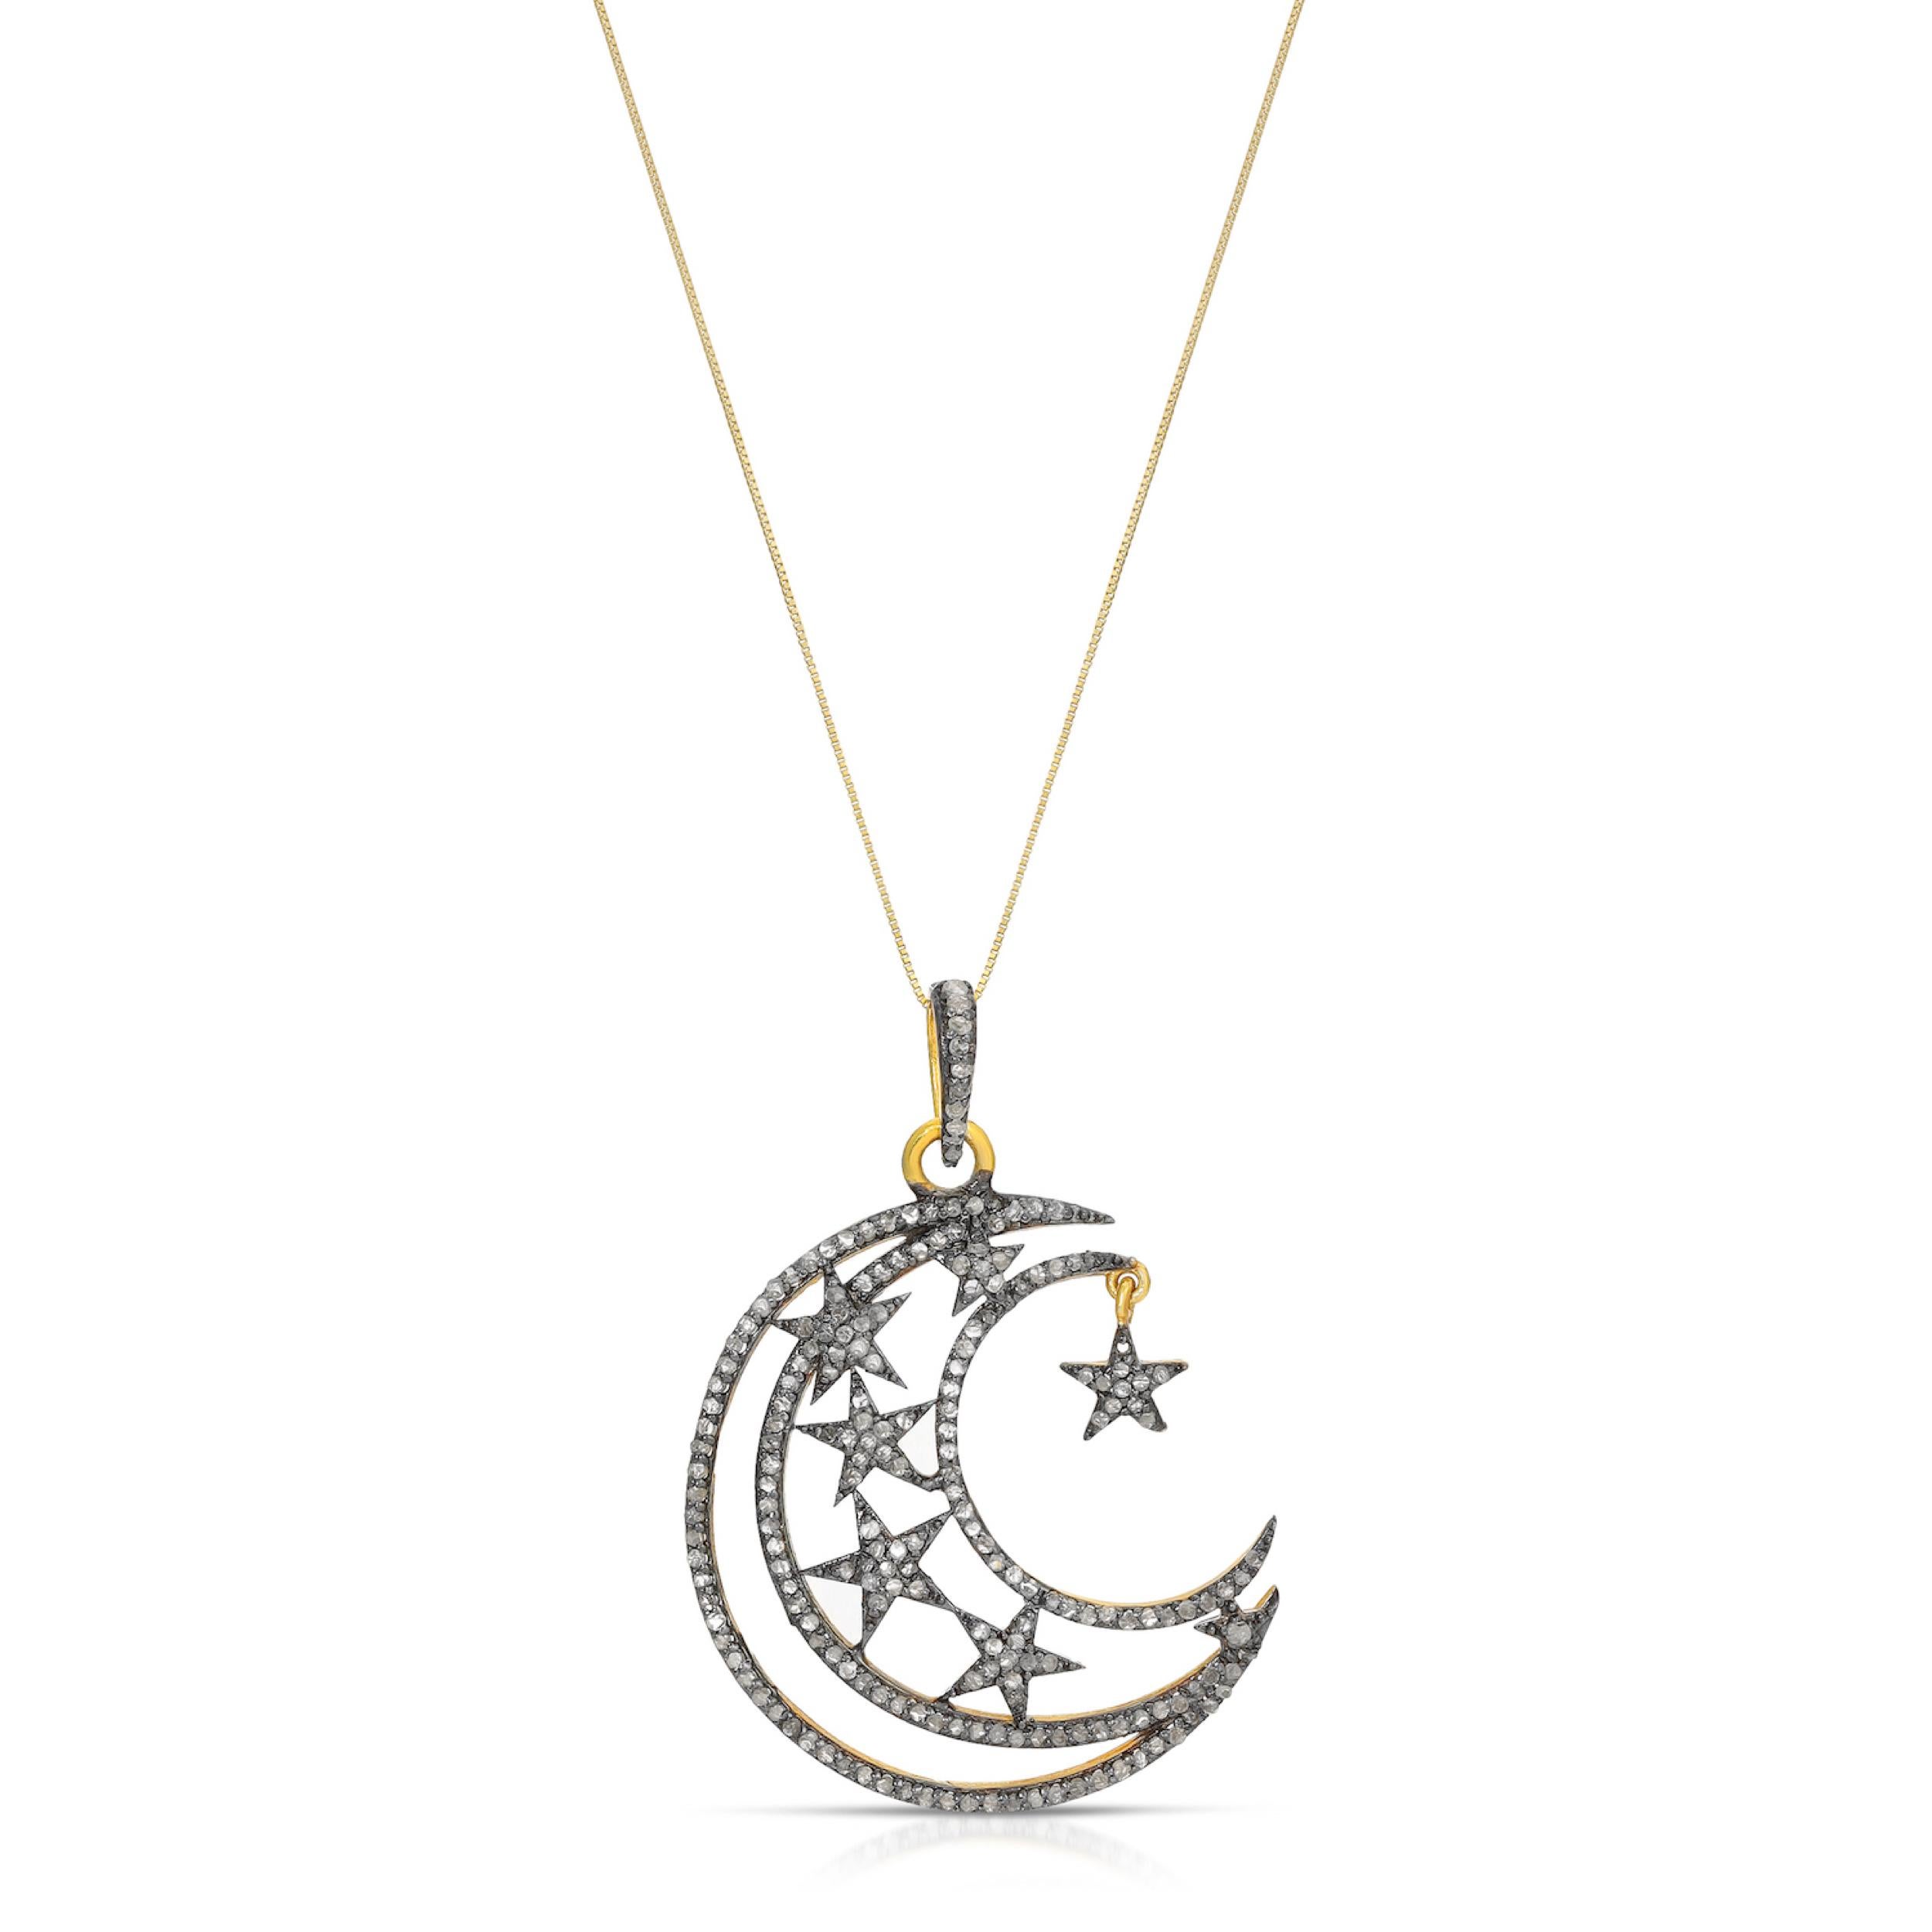 I’ll give you the Moon and the Stars in the form of a fabulous pendant featuring a Diamond set moon, Diamond set stars and contrasting 18 Karat Gold overlay Silver accents suspended on an 18 inch 14 Karat fine Gold chain. This beautiful pendant